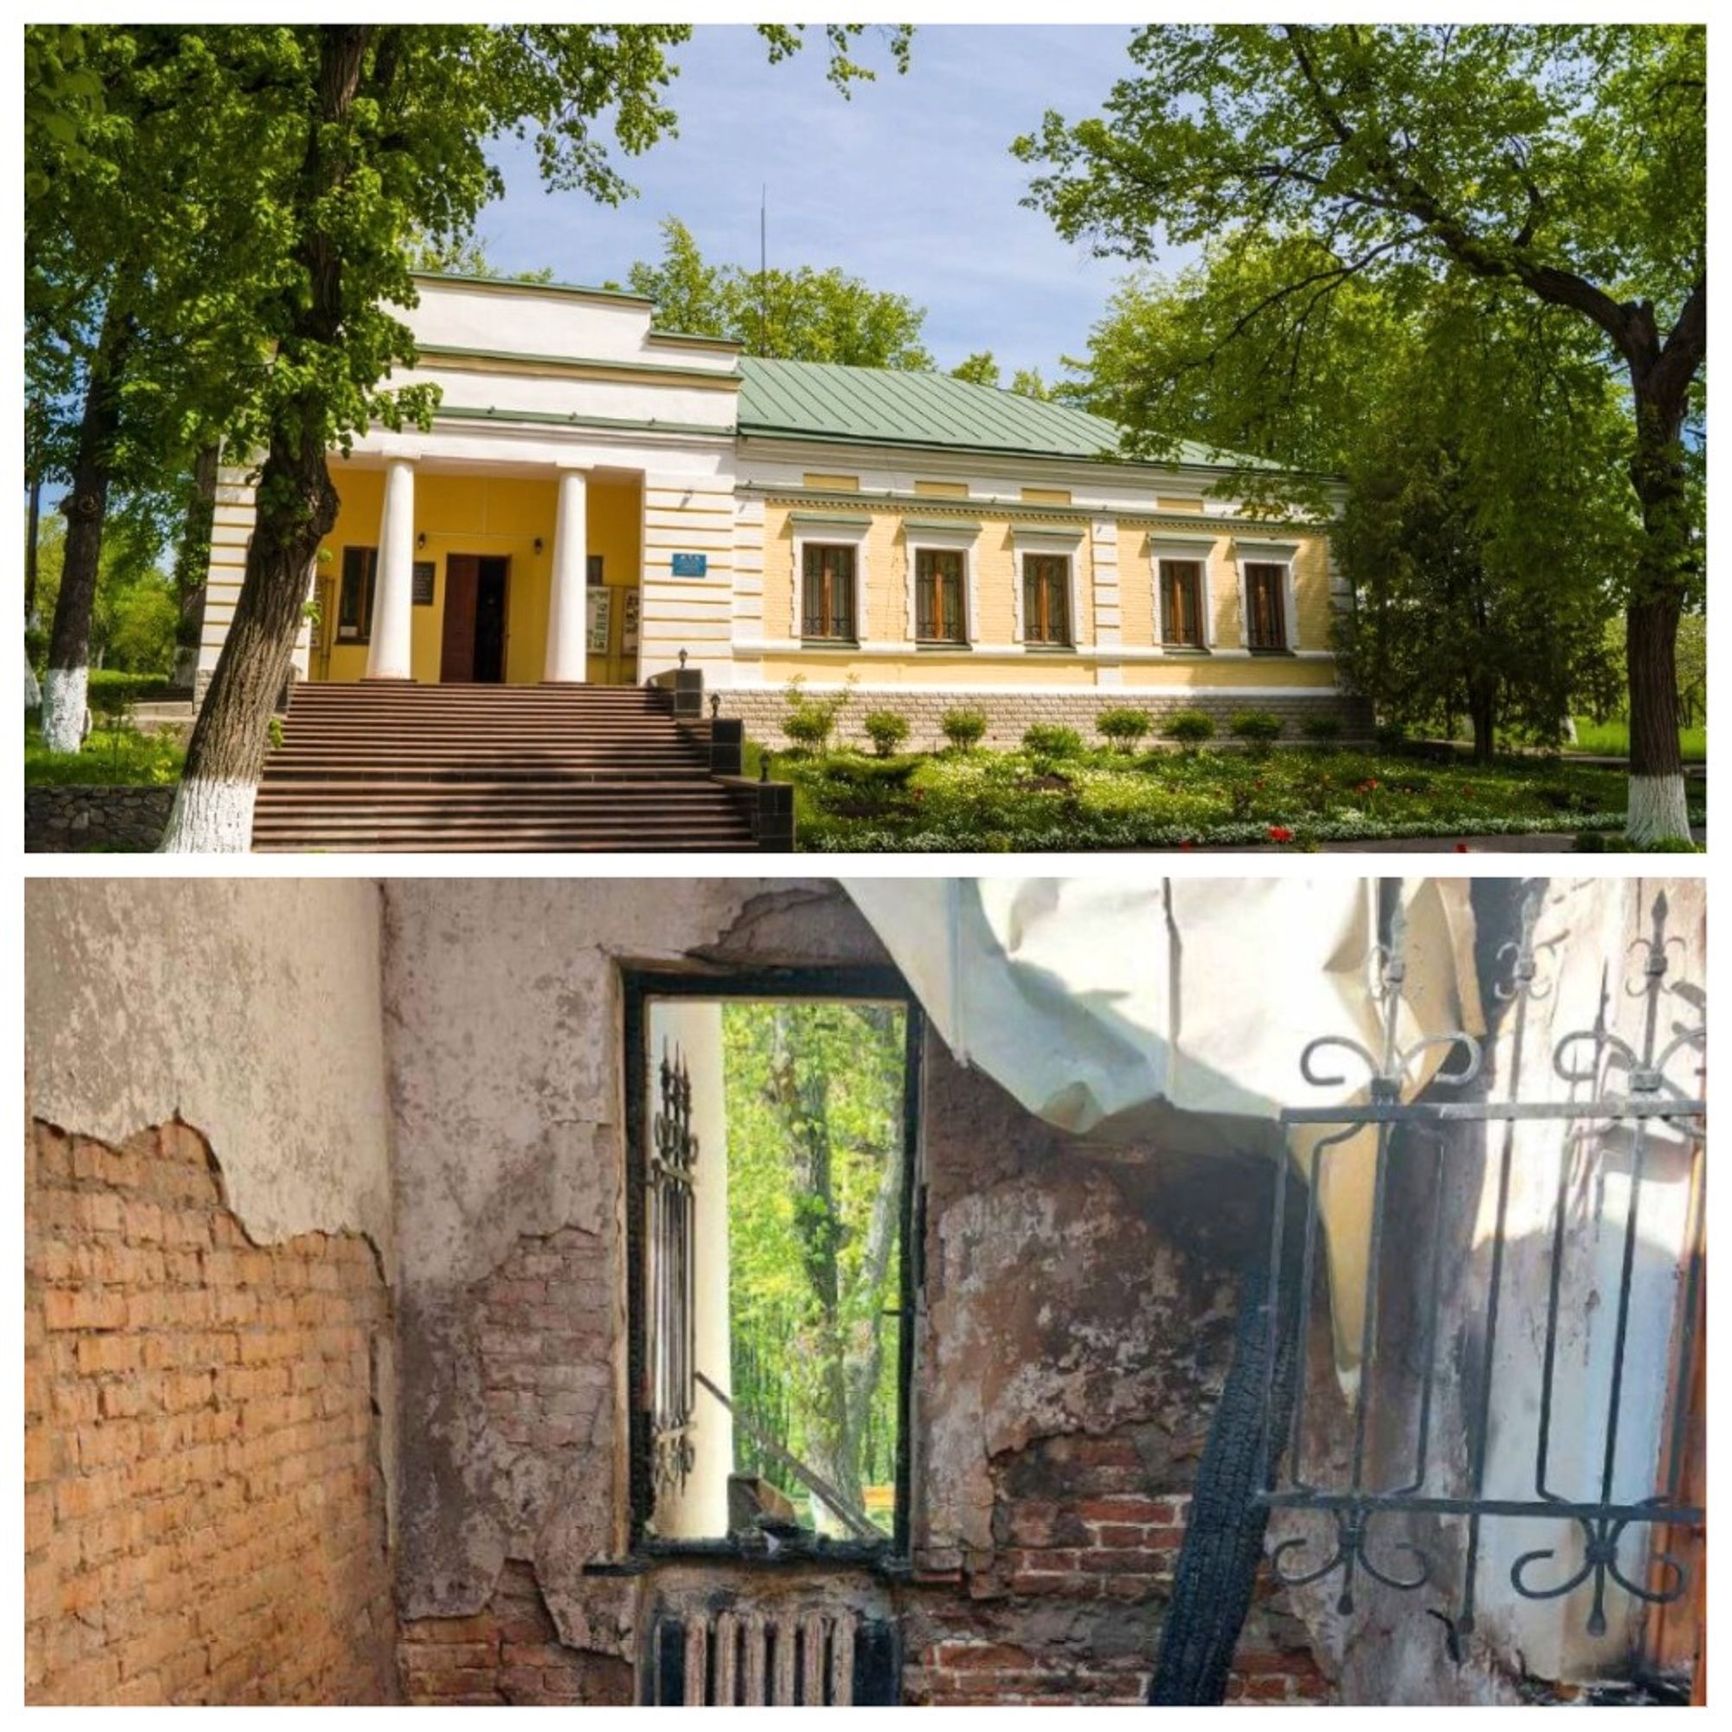 The Skovoroda Museum before and after the Russian attack